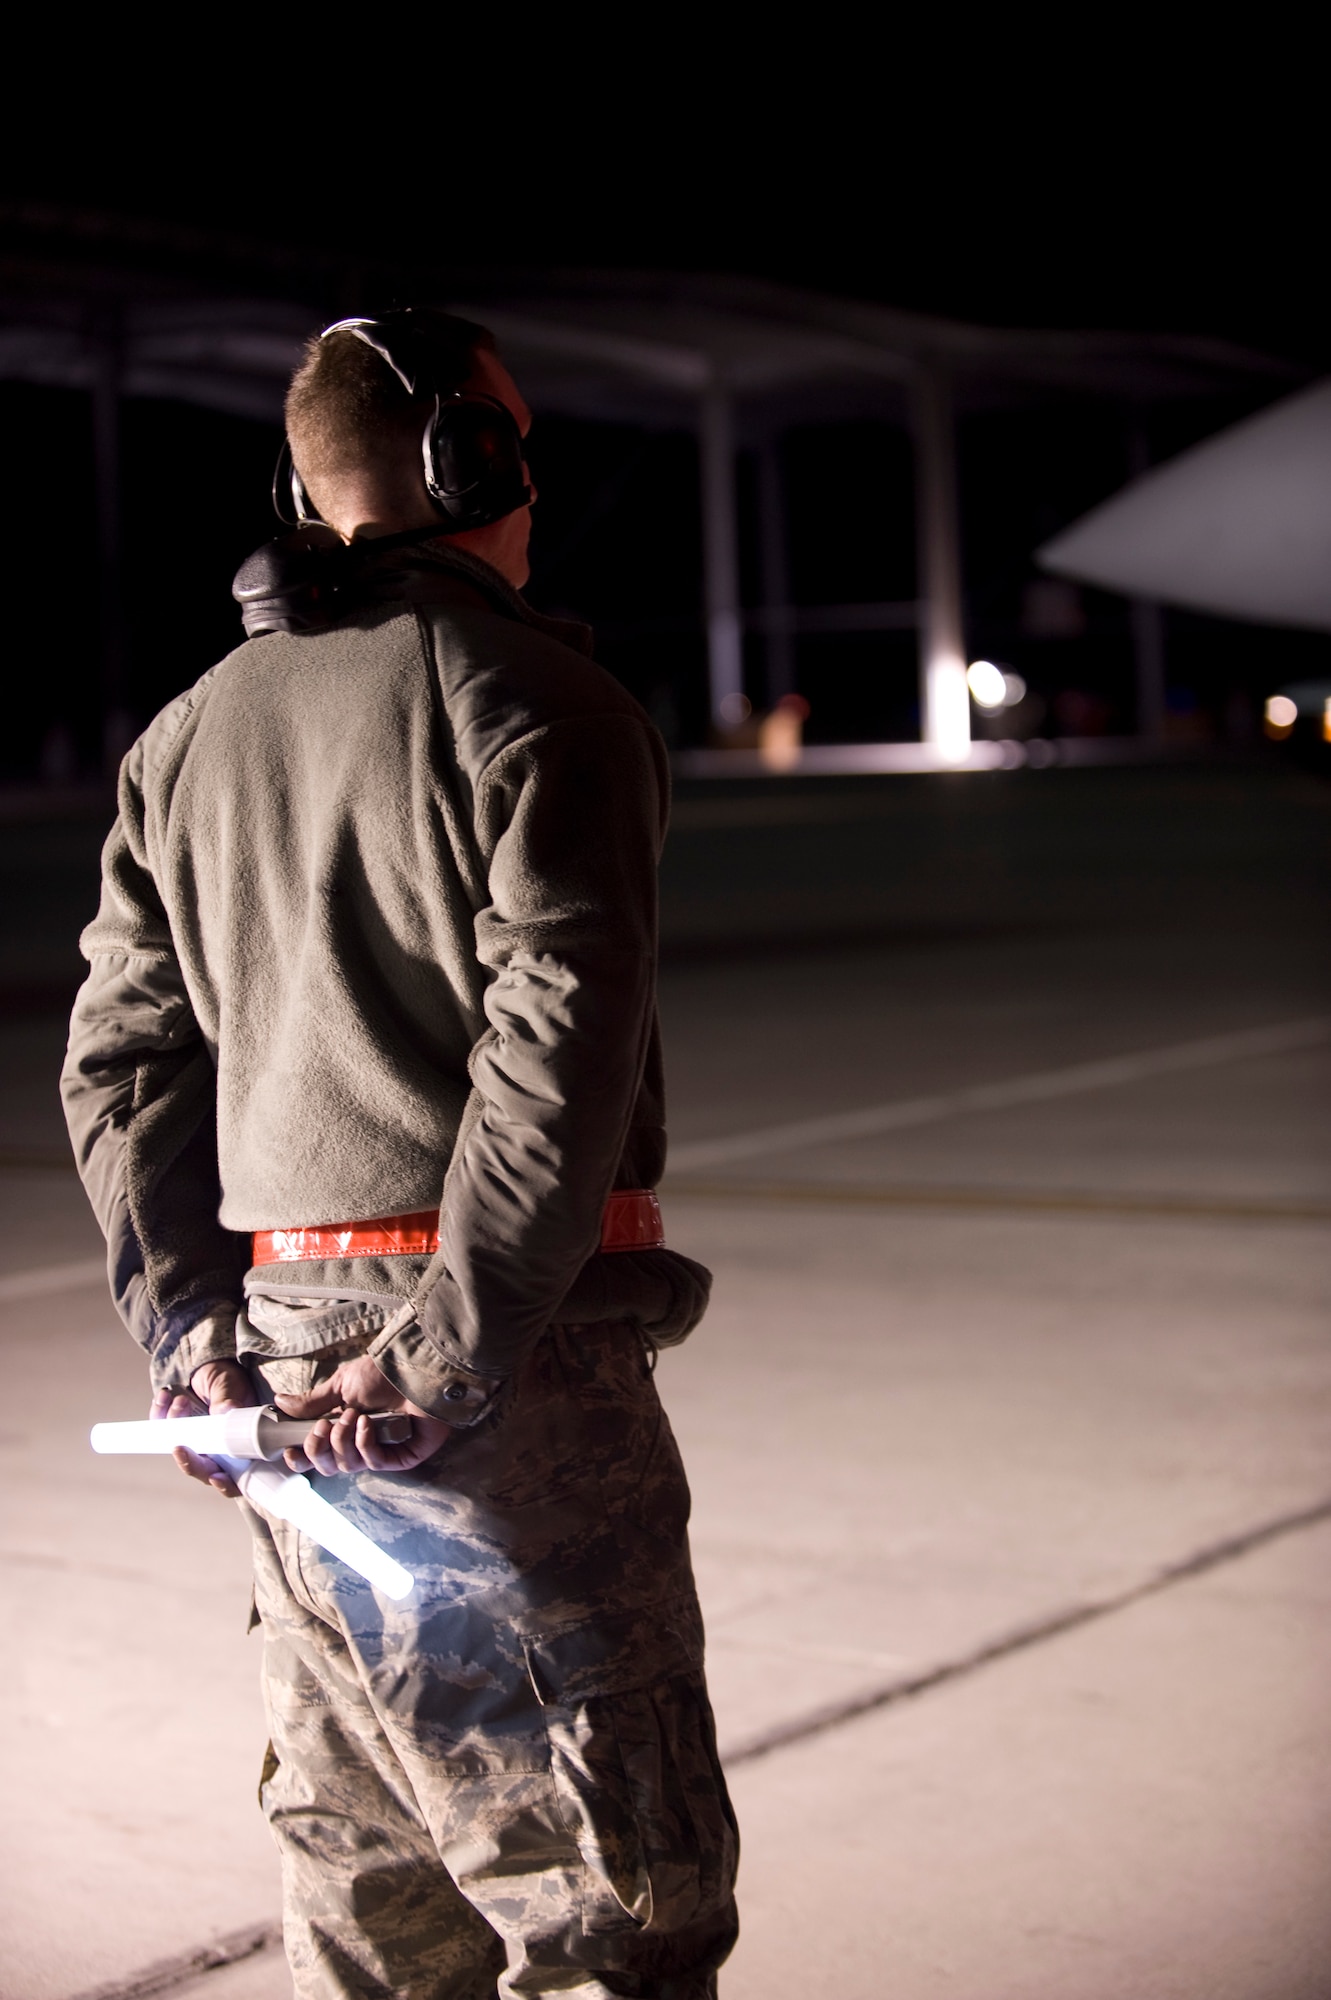 U.S. Air Force Airman 1st Class Jamie Morgan, 366th Aircraft Maintenance Squadron, gets ready to direct an F-15E Strike Eagle out of the terminal April 21, 2013 at Mountain Home Air Force Base, Idaho. Airmen in non-aviation roles will be conducting a wide range of tasks to assist F-15E crews providing close-air support capabilities in Southwest Asia. (U.S. Air Force photo/Airman 1st Class Malissa Lott) (Released)